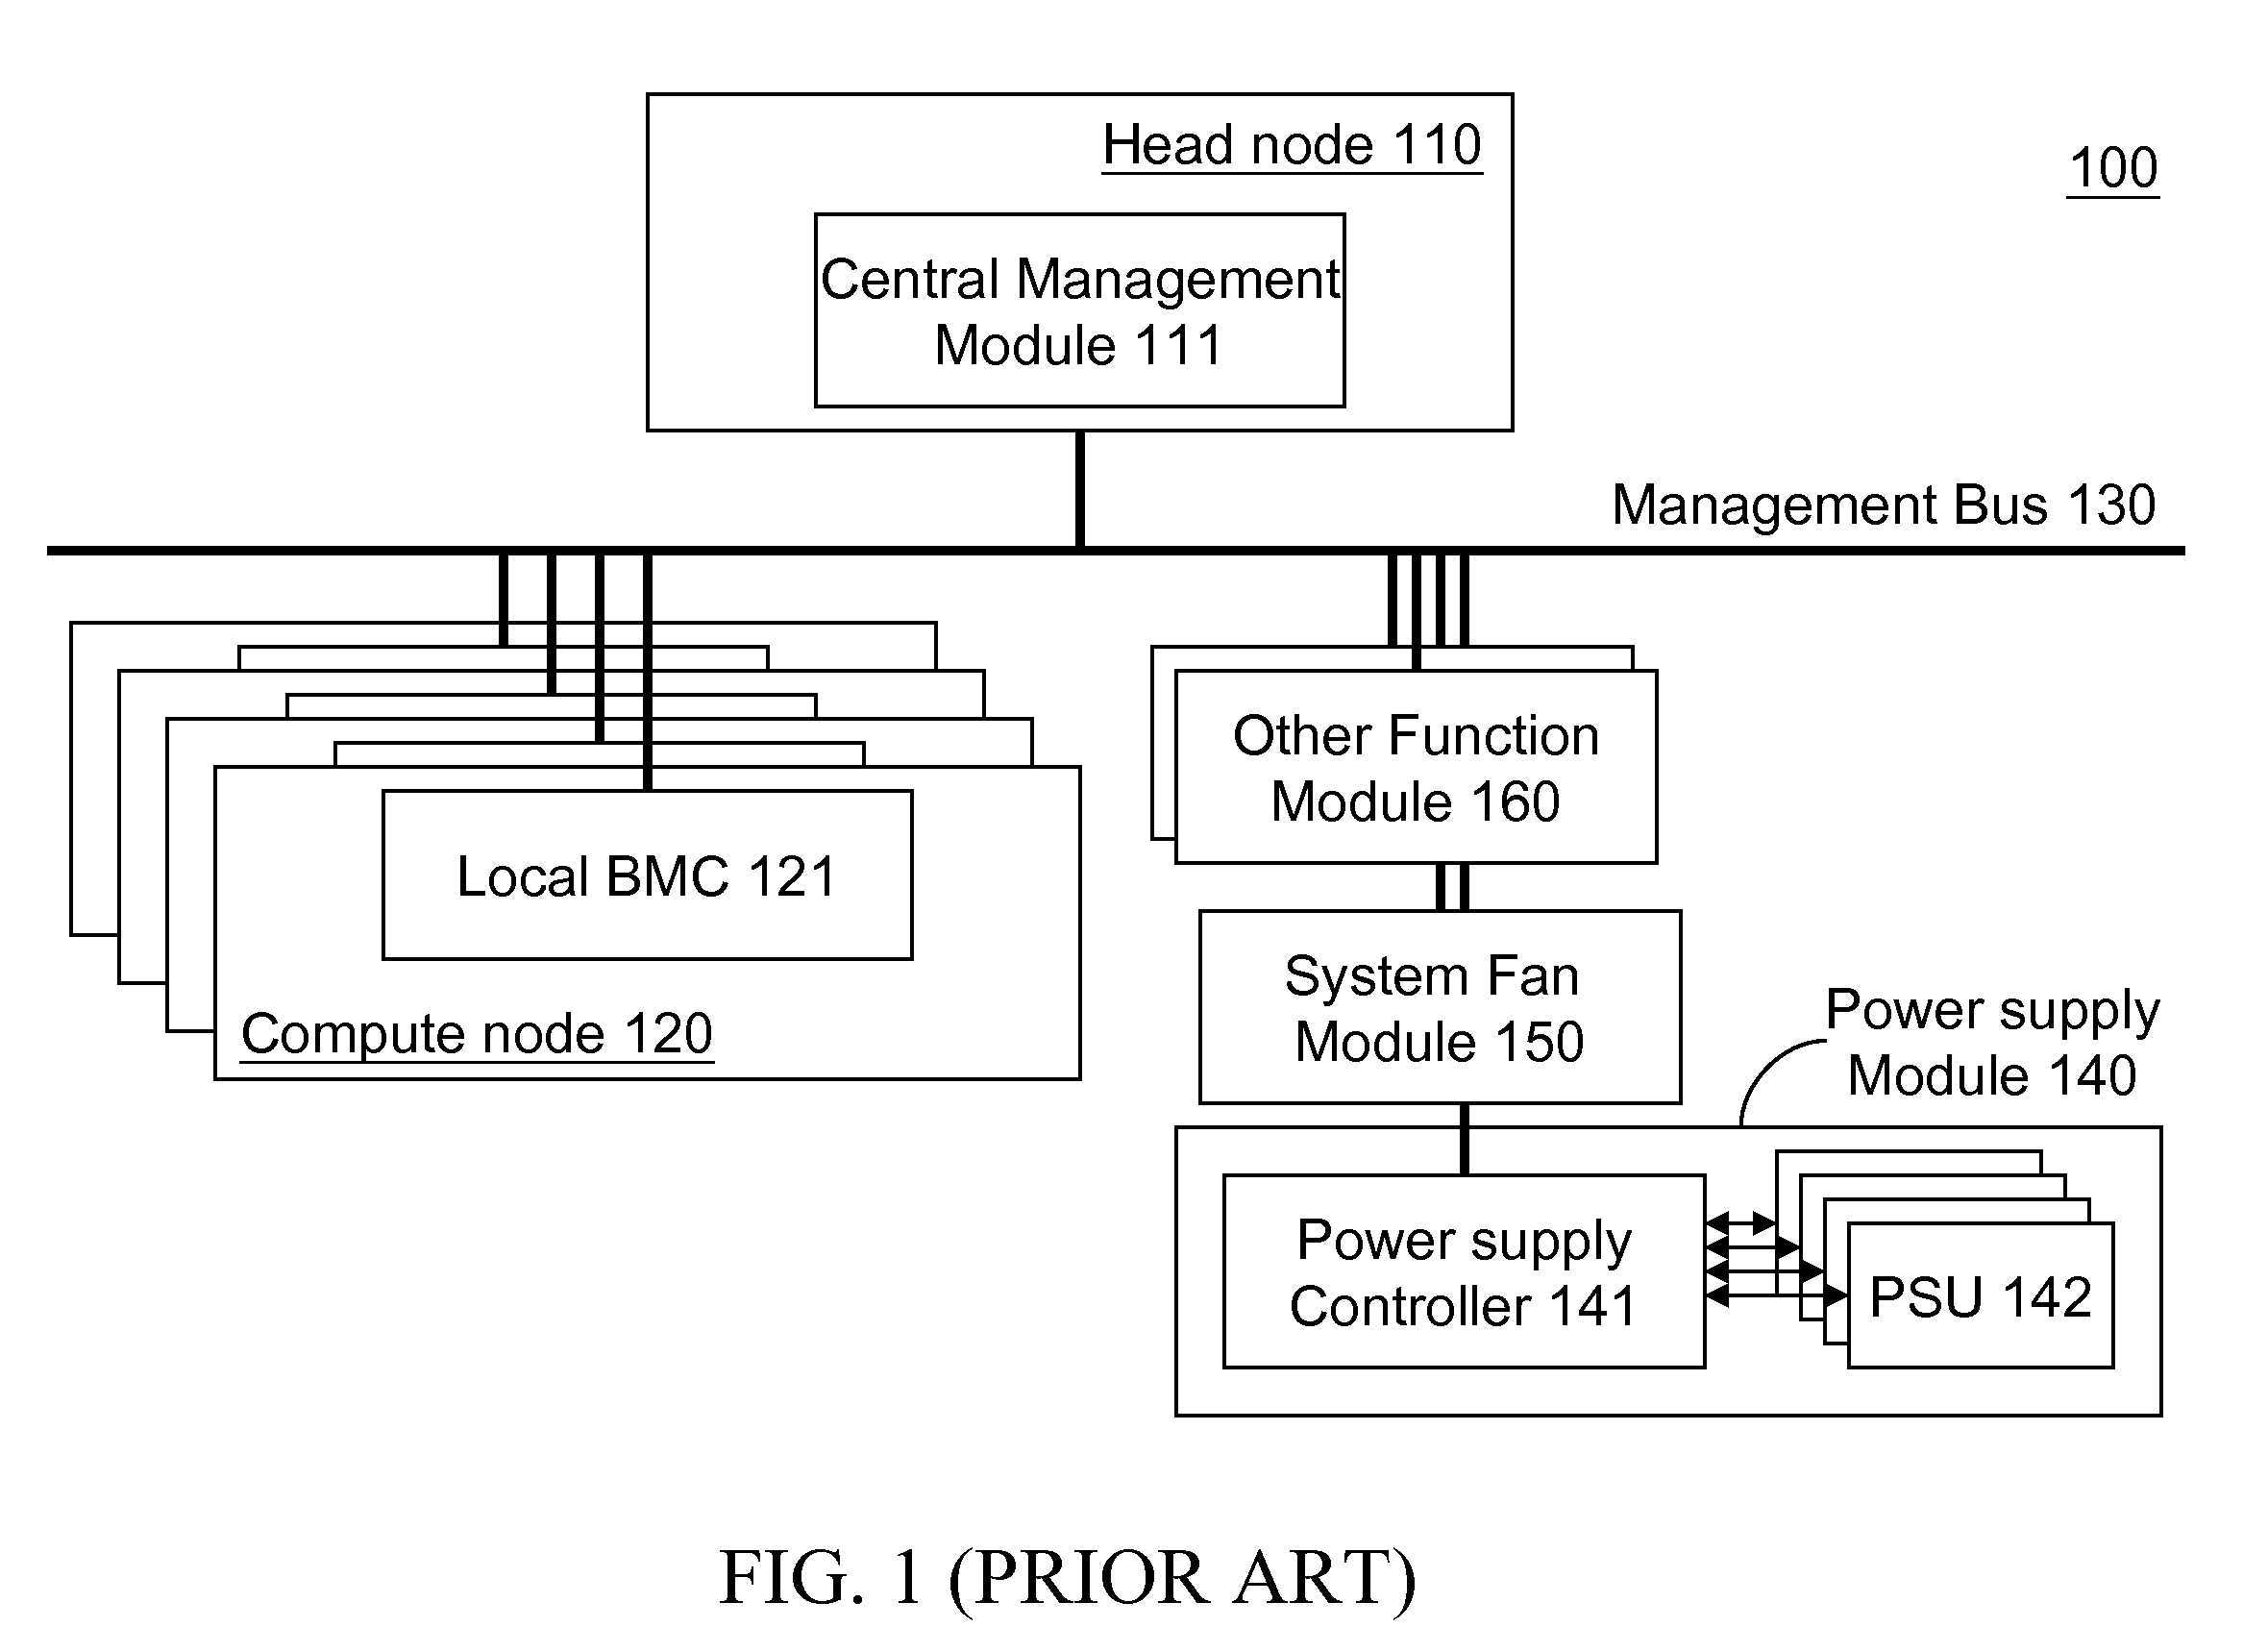 Alternative Local Card, Central Management Module and System Management Architecture For Multi-Mainboard System